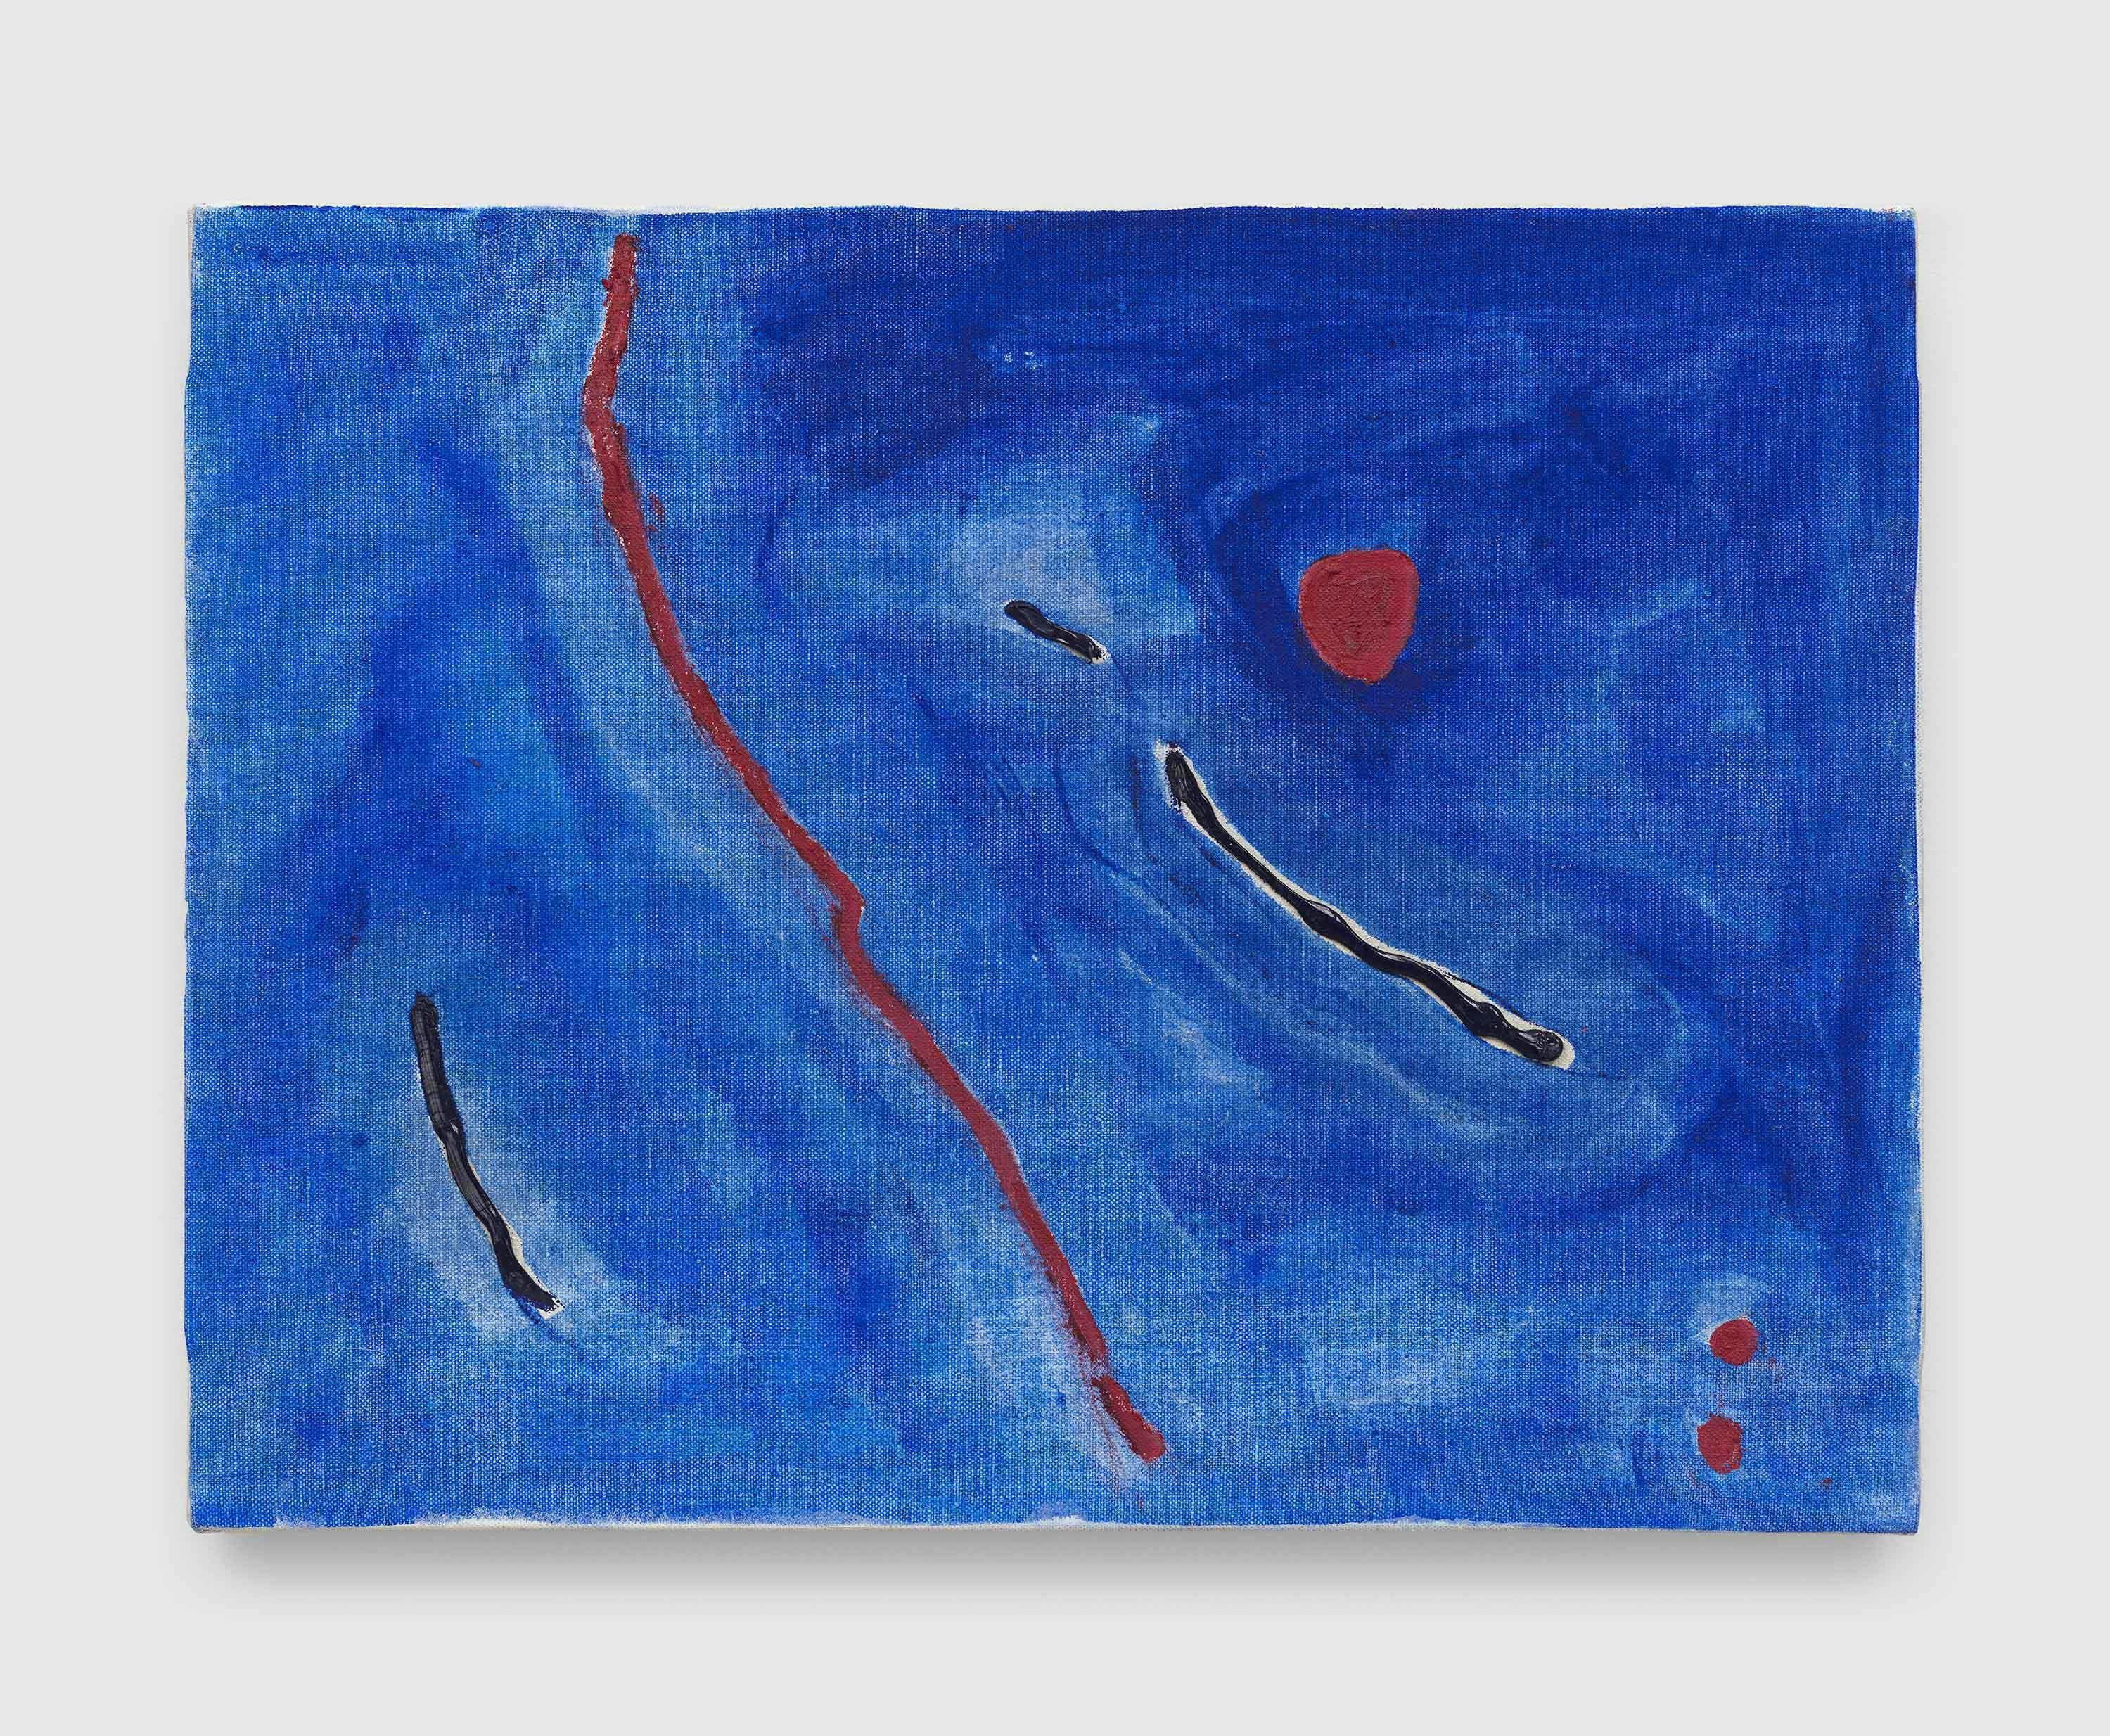 A painting by Raoul De Keyser, titled Passage, dated 2010.